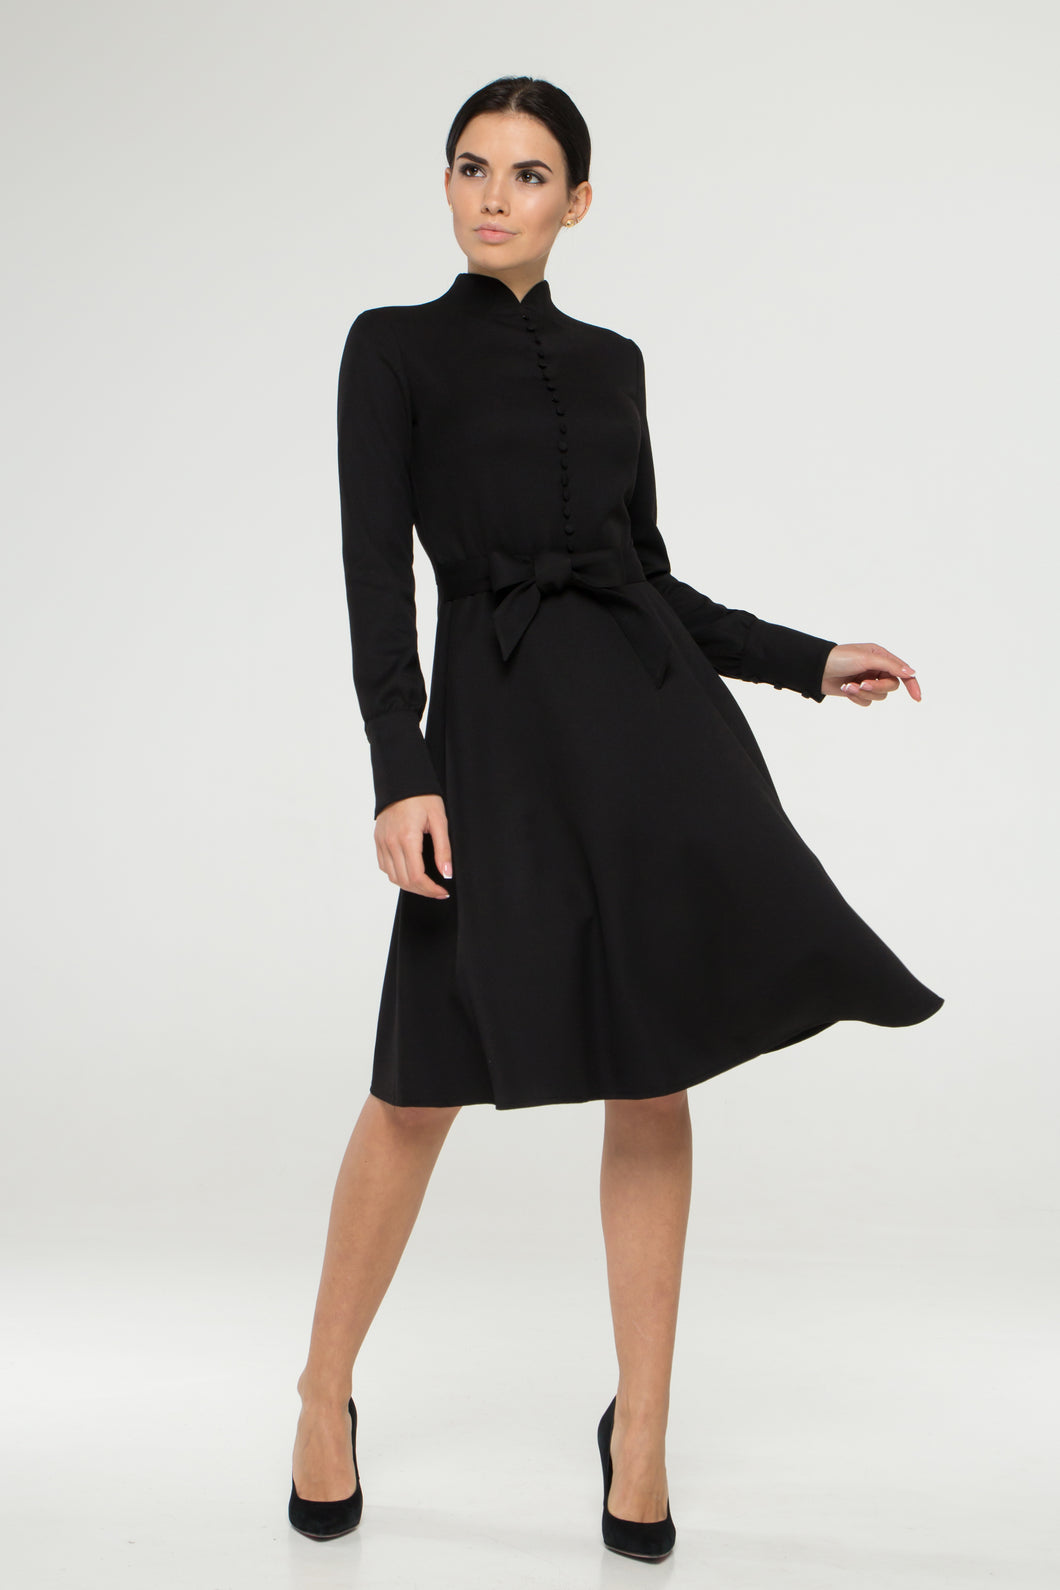 Black mandarin collar dress with covered buttons